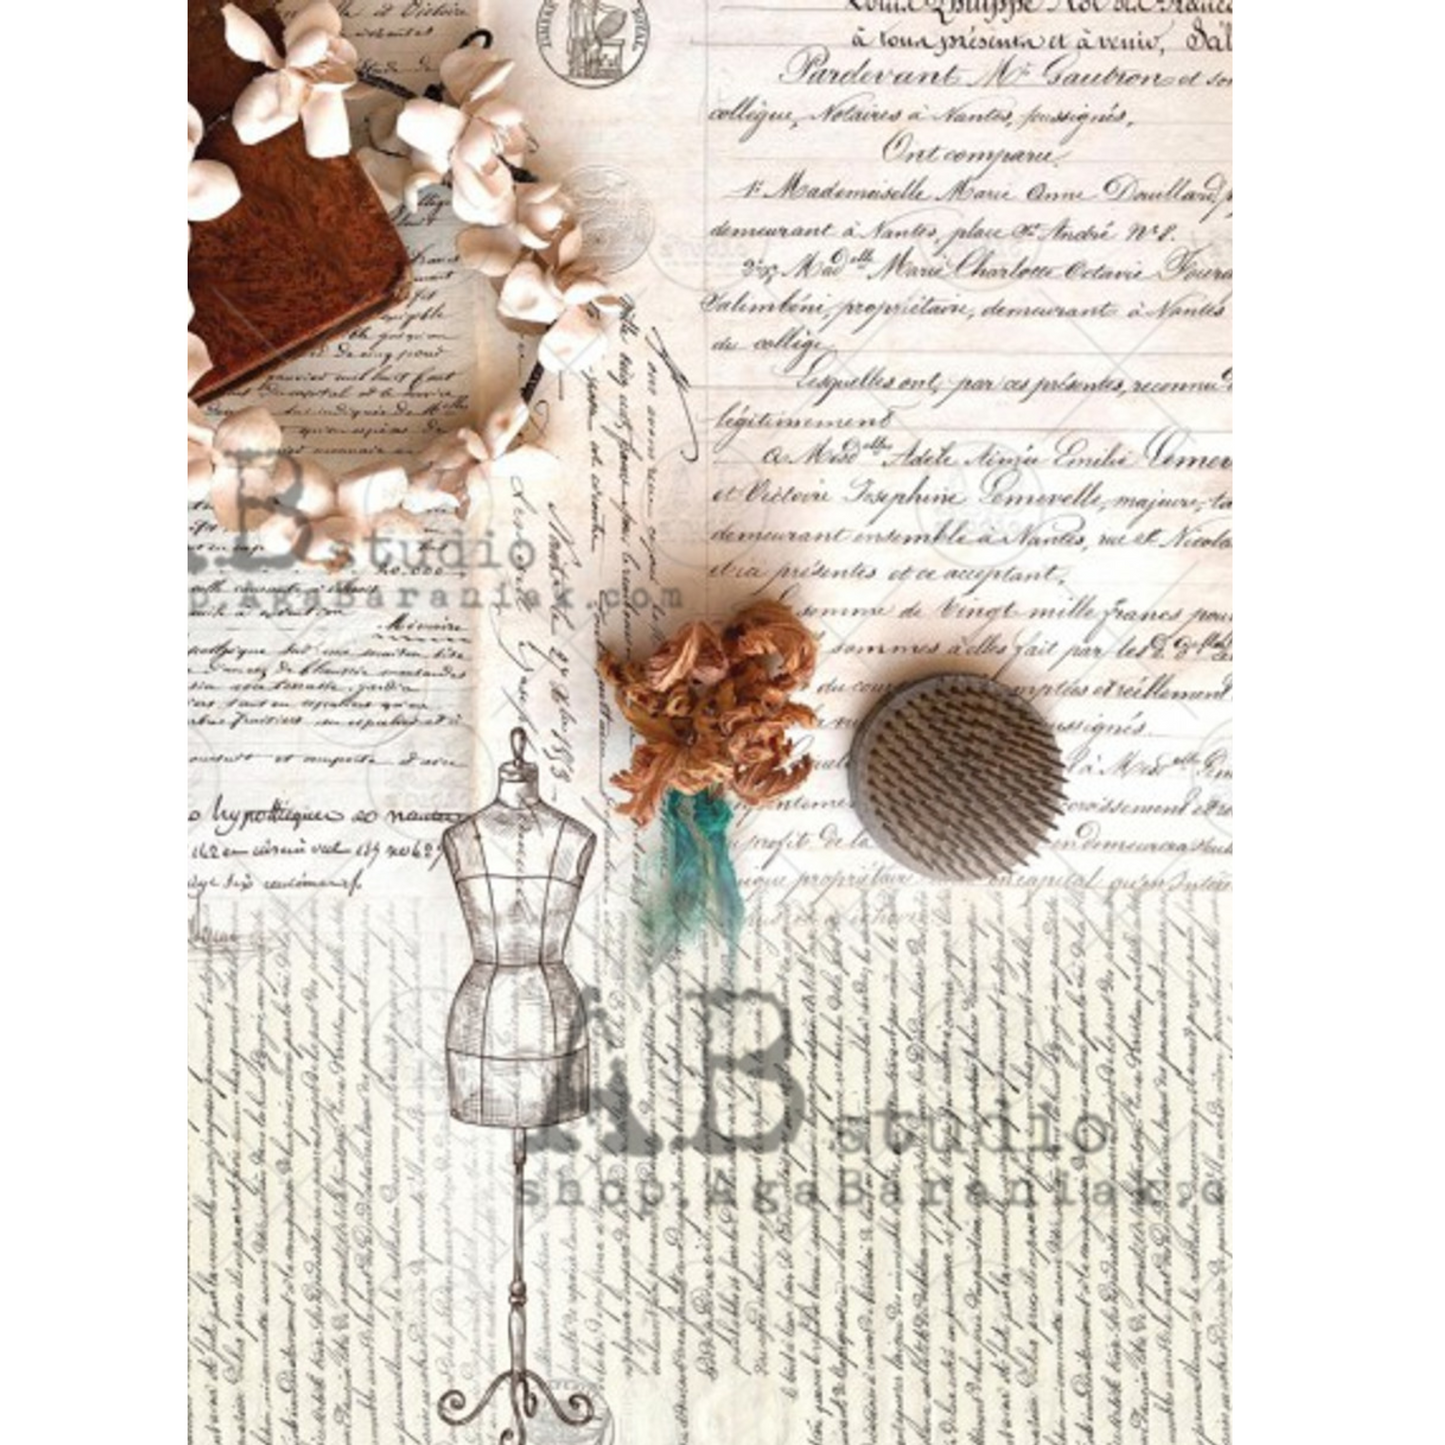 "Dressform Script" Vellum Paper by AB Studio. Size A4 available at Milton's Daughter.